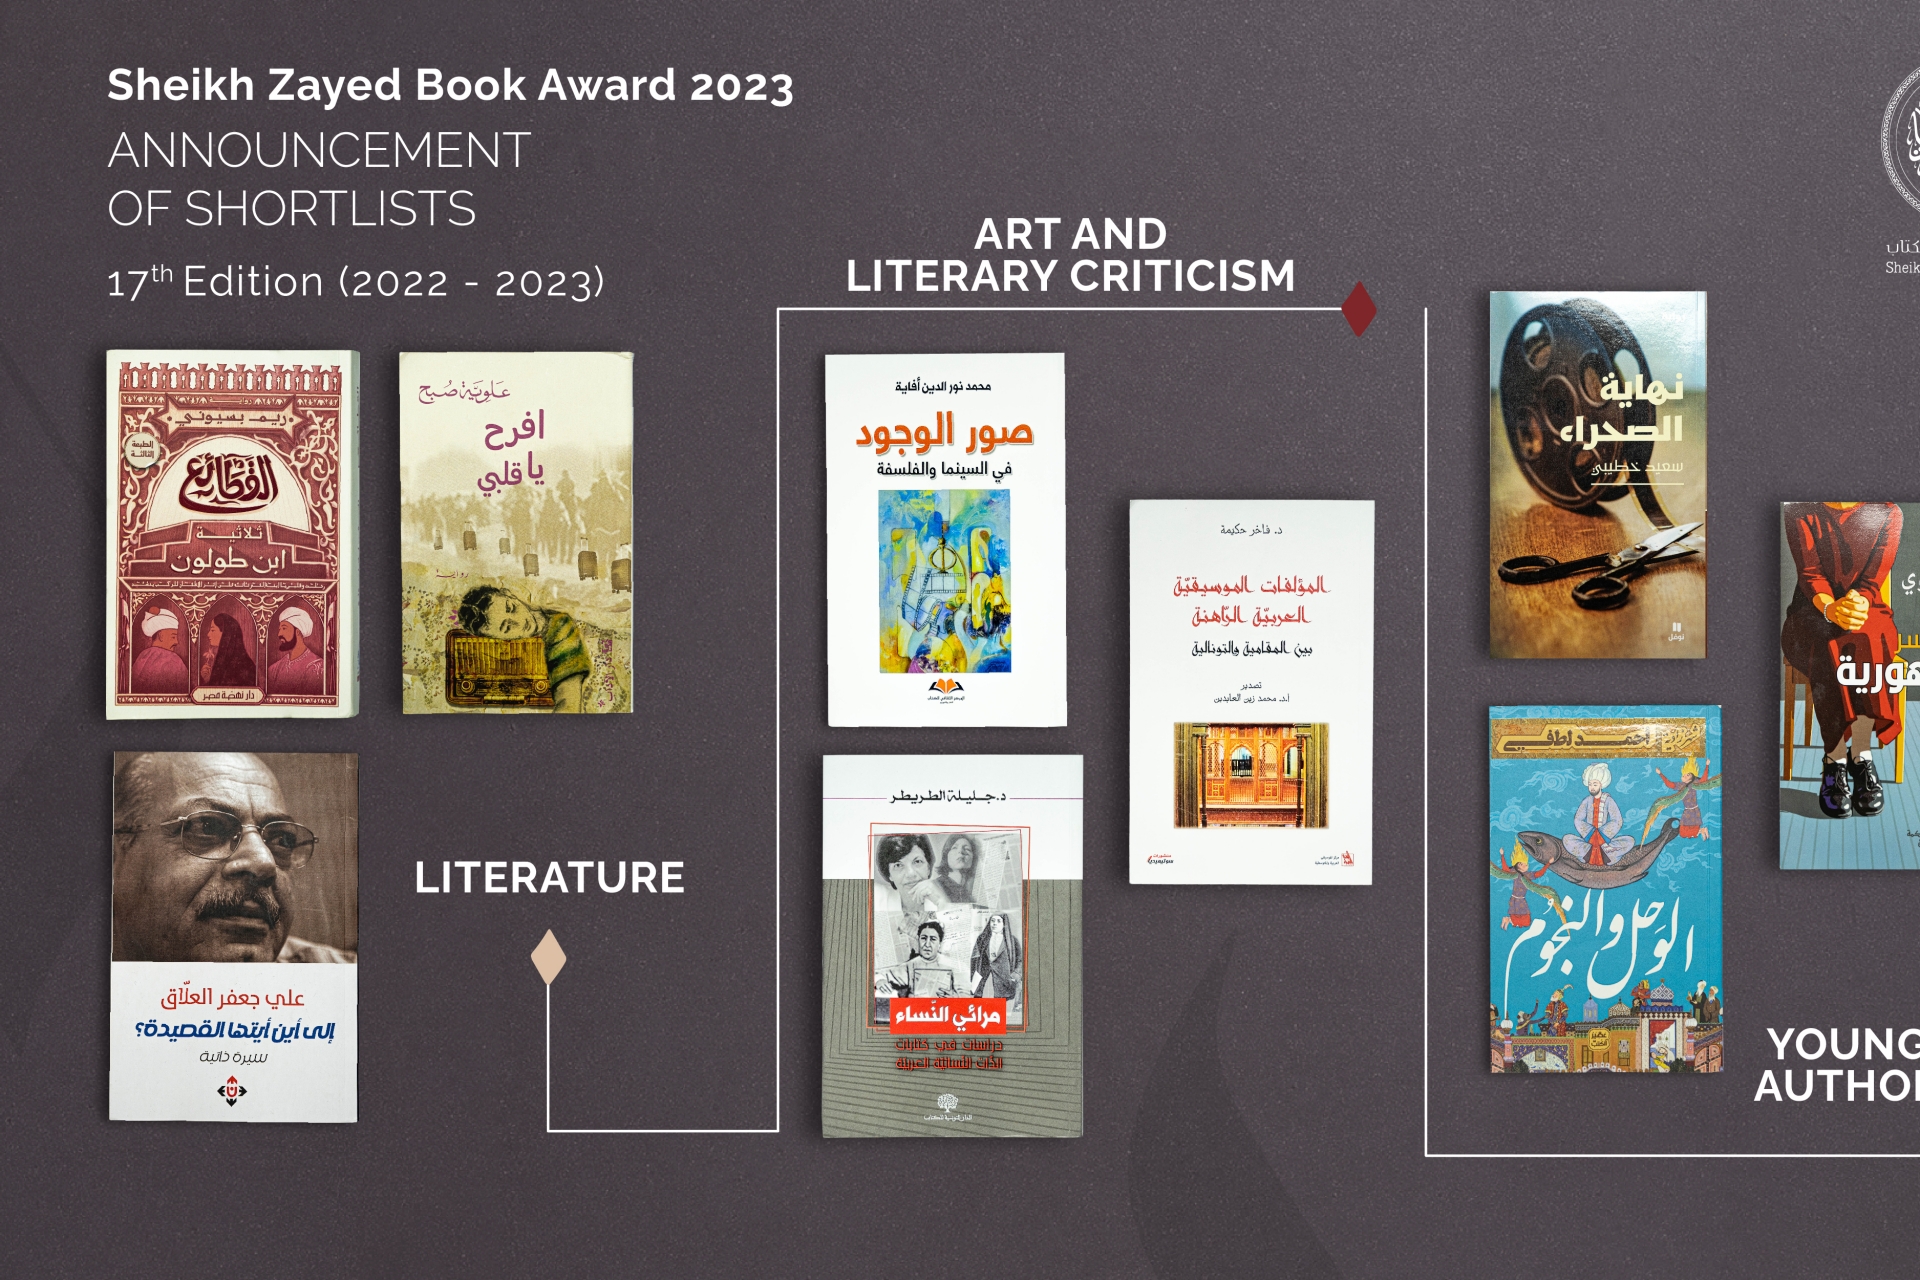 An image that has 3 book covers of shortlisted books for 3 of the categories for the Sheikh Zayed Book Awards. The categories each have three books with titles in arabic and are: Literature, Art and Literary Criticism, and Young Author. 